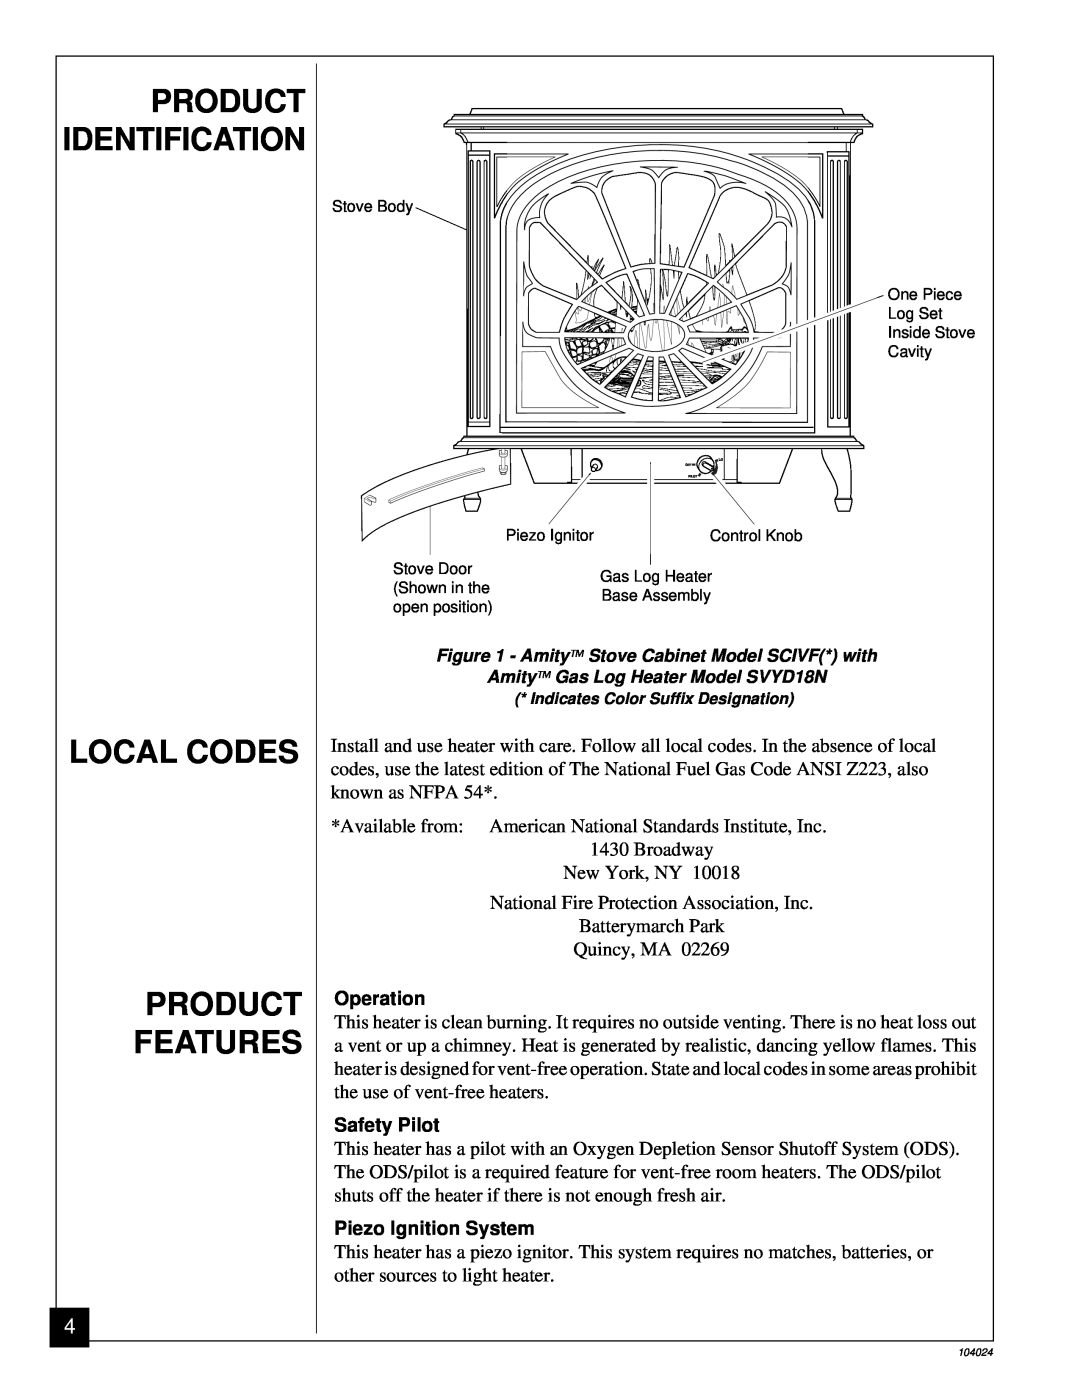 Desa SVYD18N installation manual Local Codes Product Features, Product Identification 